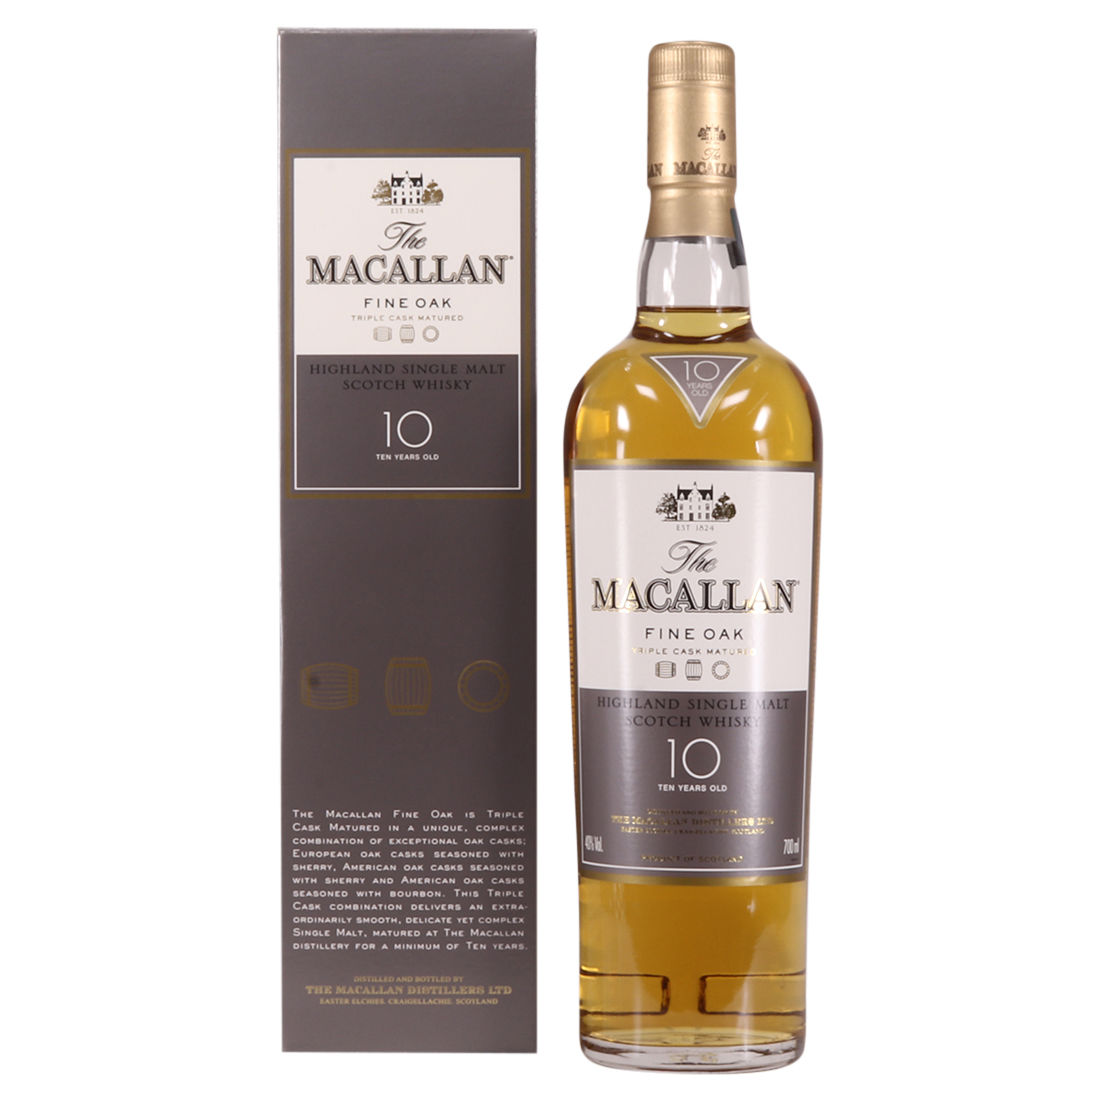 Macallan 10 Year Old Fine Oak Auction The Grand Whisky Auction